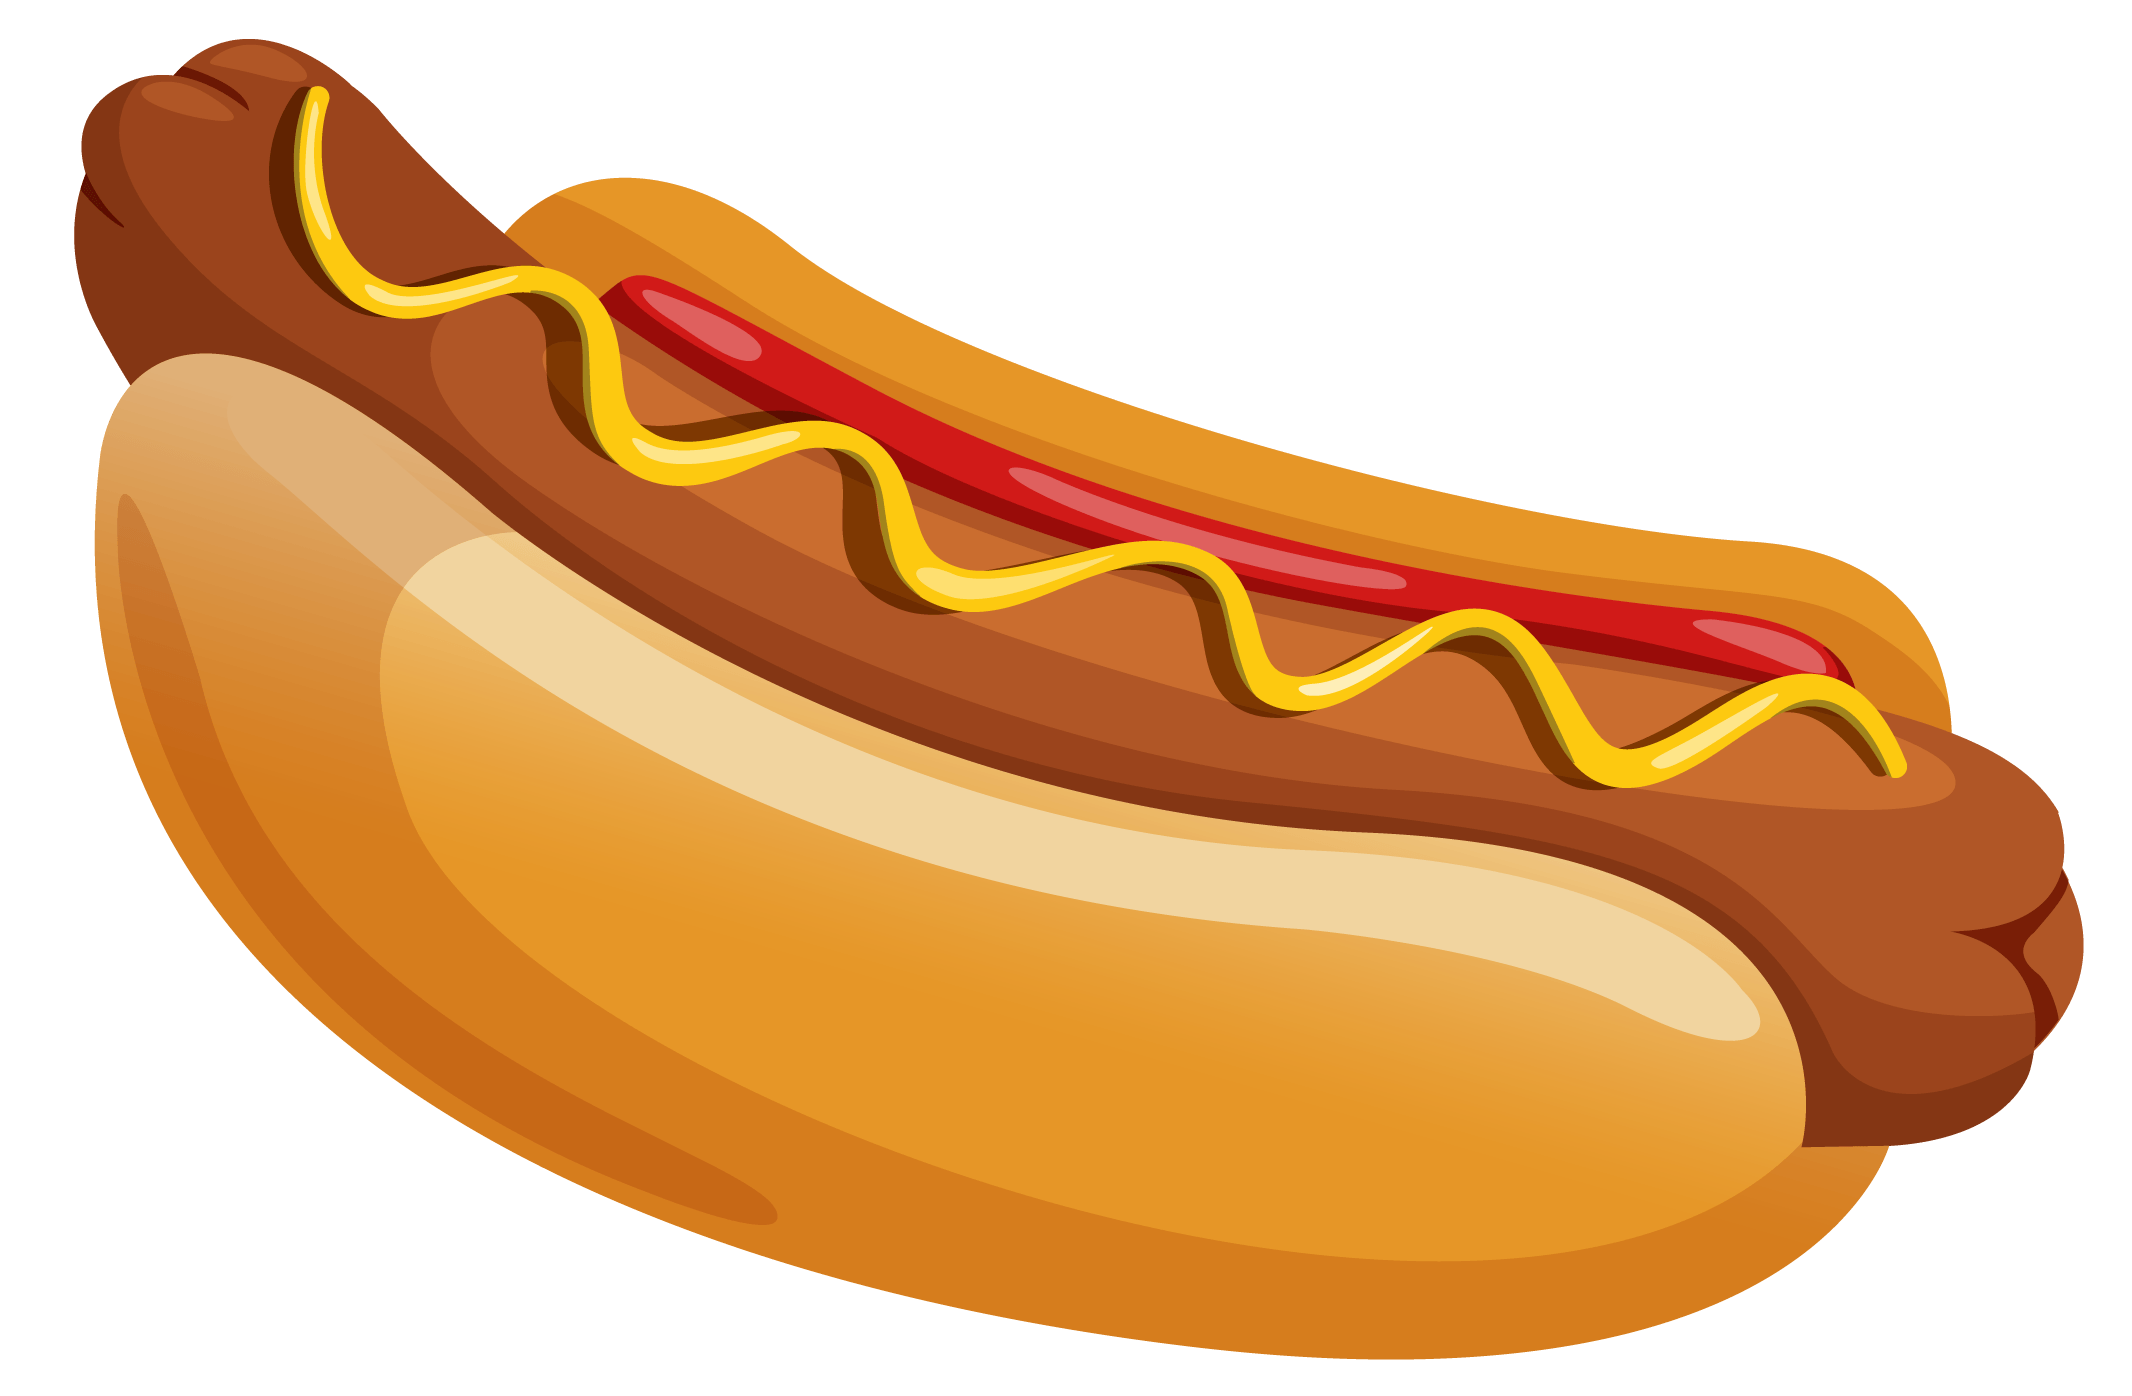 Hot Dog with Mustard PNG Clipart